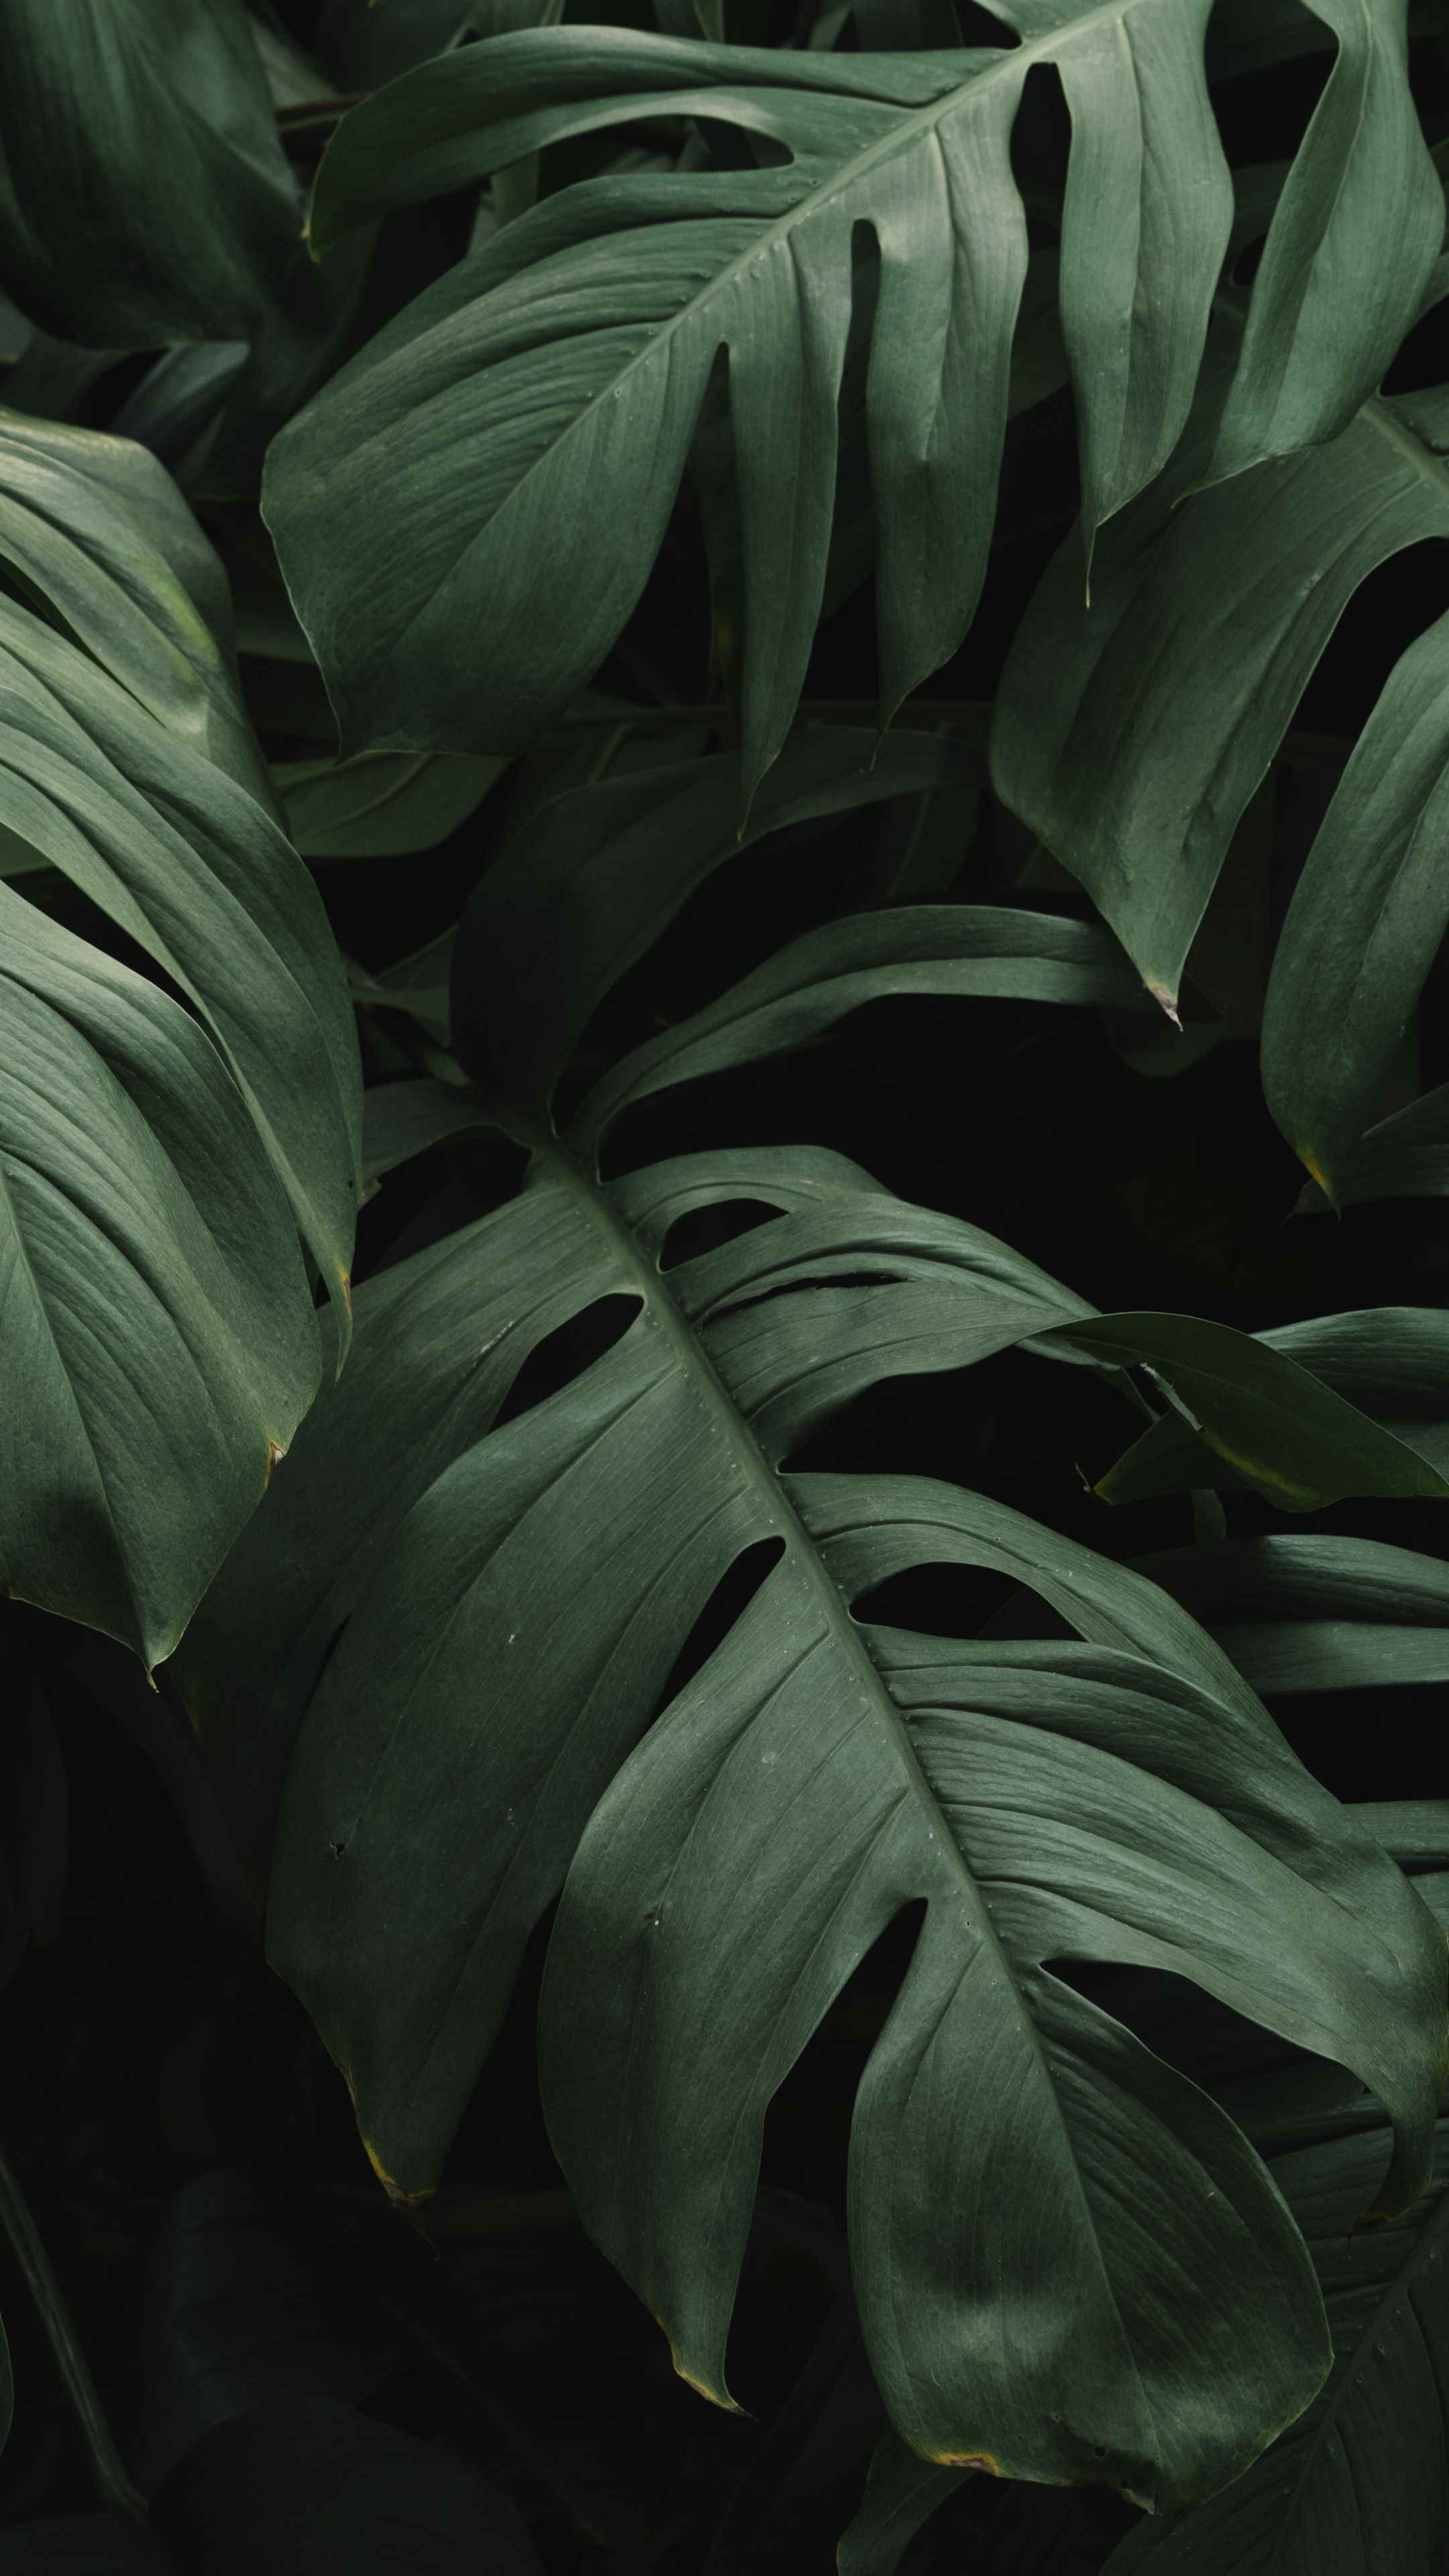 Green Leaf: The Swiss cheese plant, Monstera deliciosa, A flowering plant that is very widely grown in temperate zones as a houseplant. 2160x3840 4K Wallpaper.